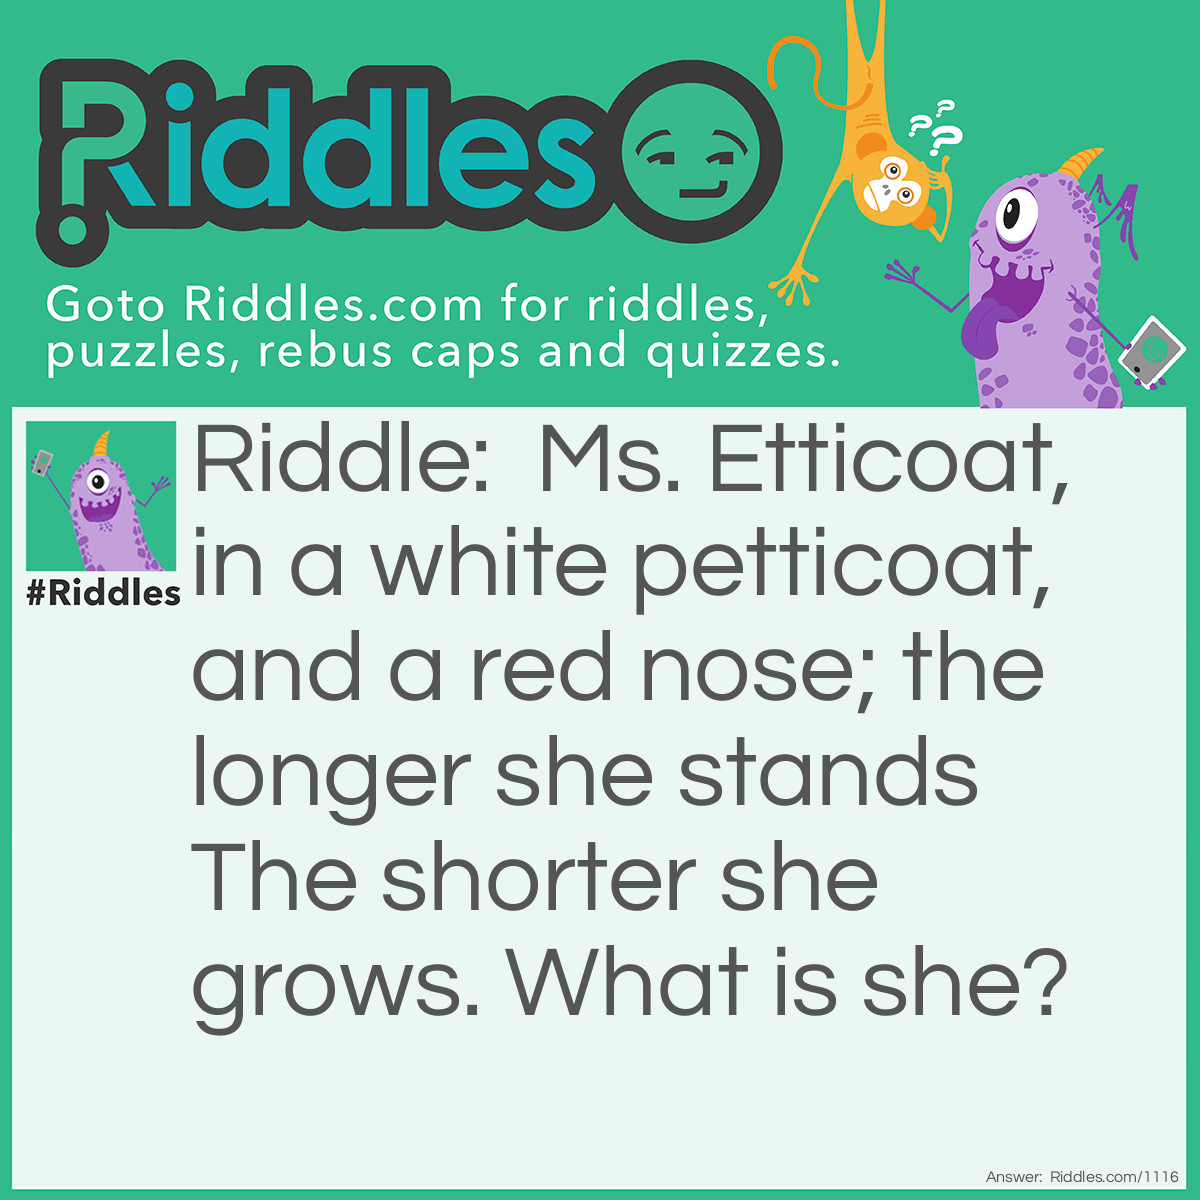 Riddle: Ms. Etticoat, in a white petticoat, and a red nose; the longer she stands The shorter she grows. What is she? Answer: A candle.